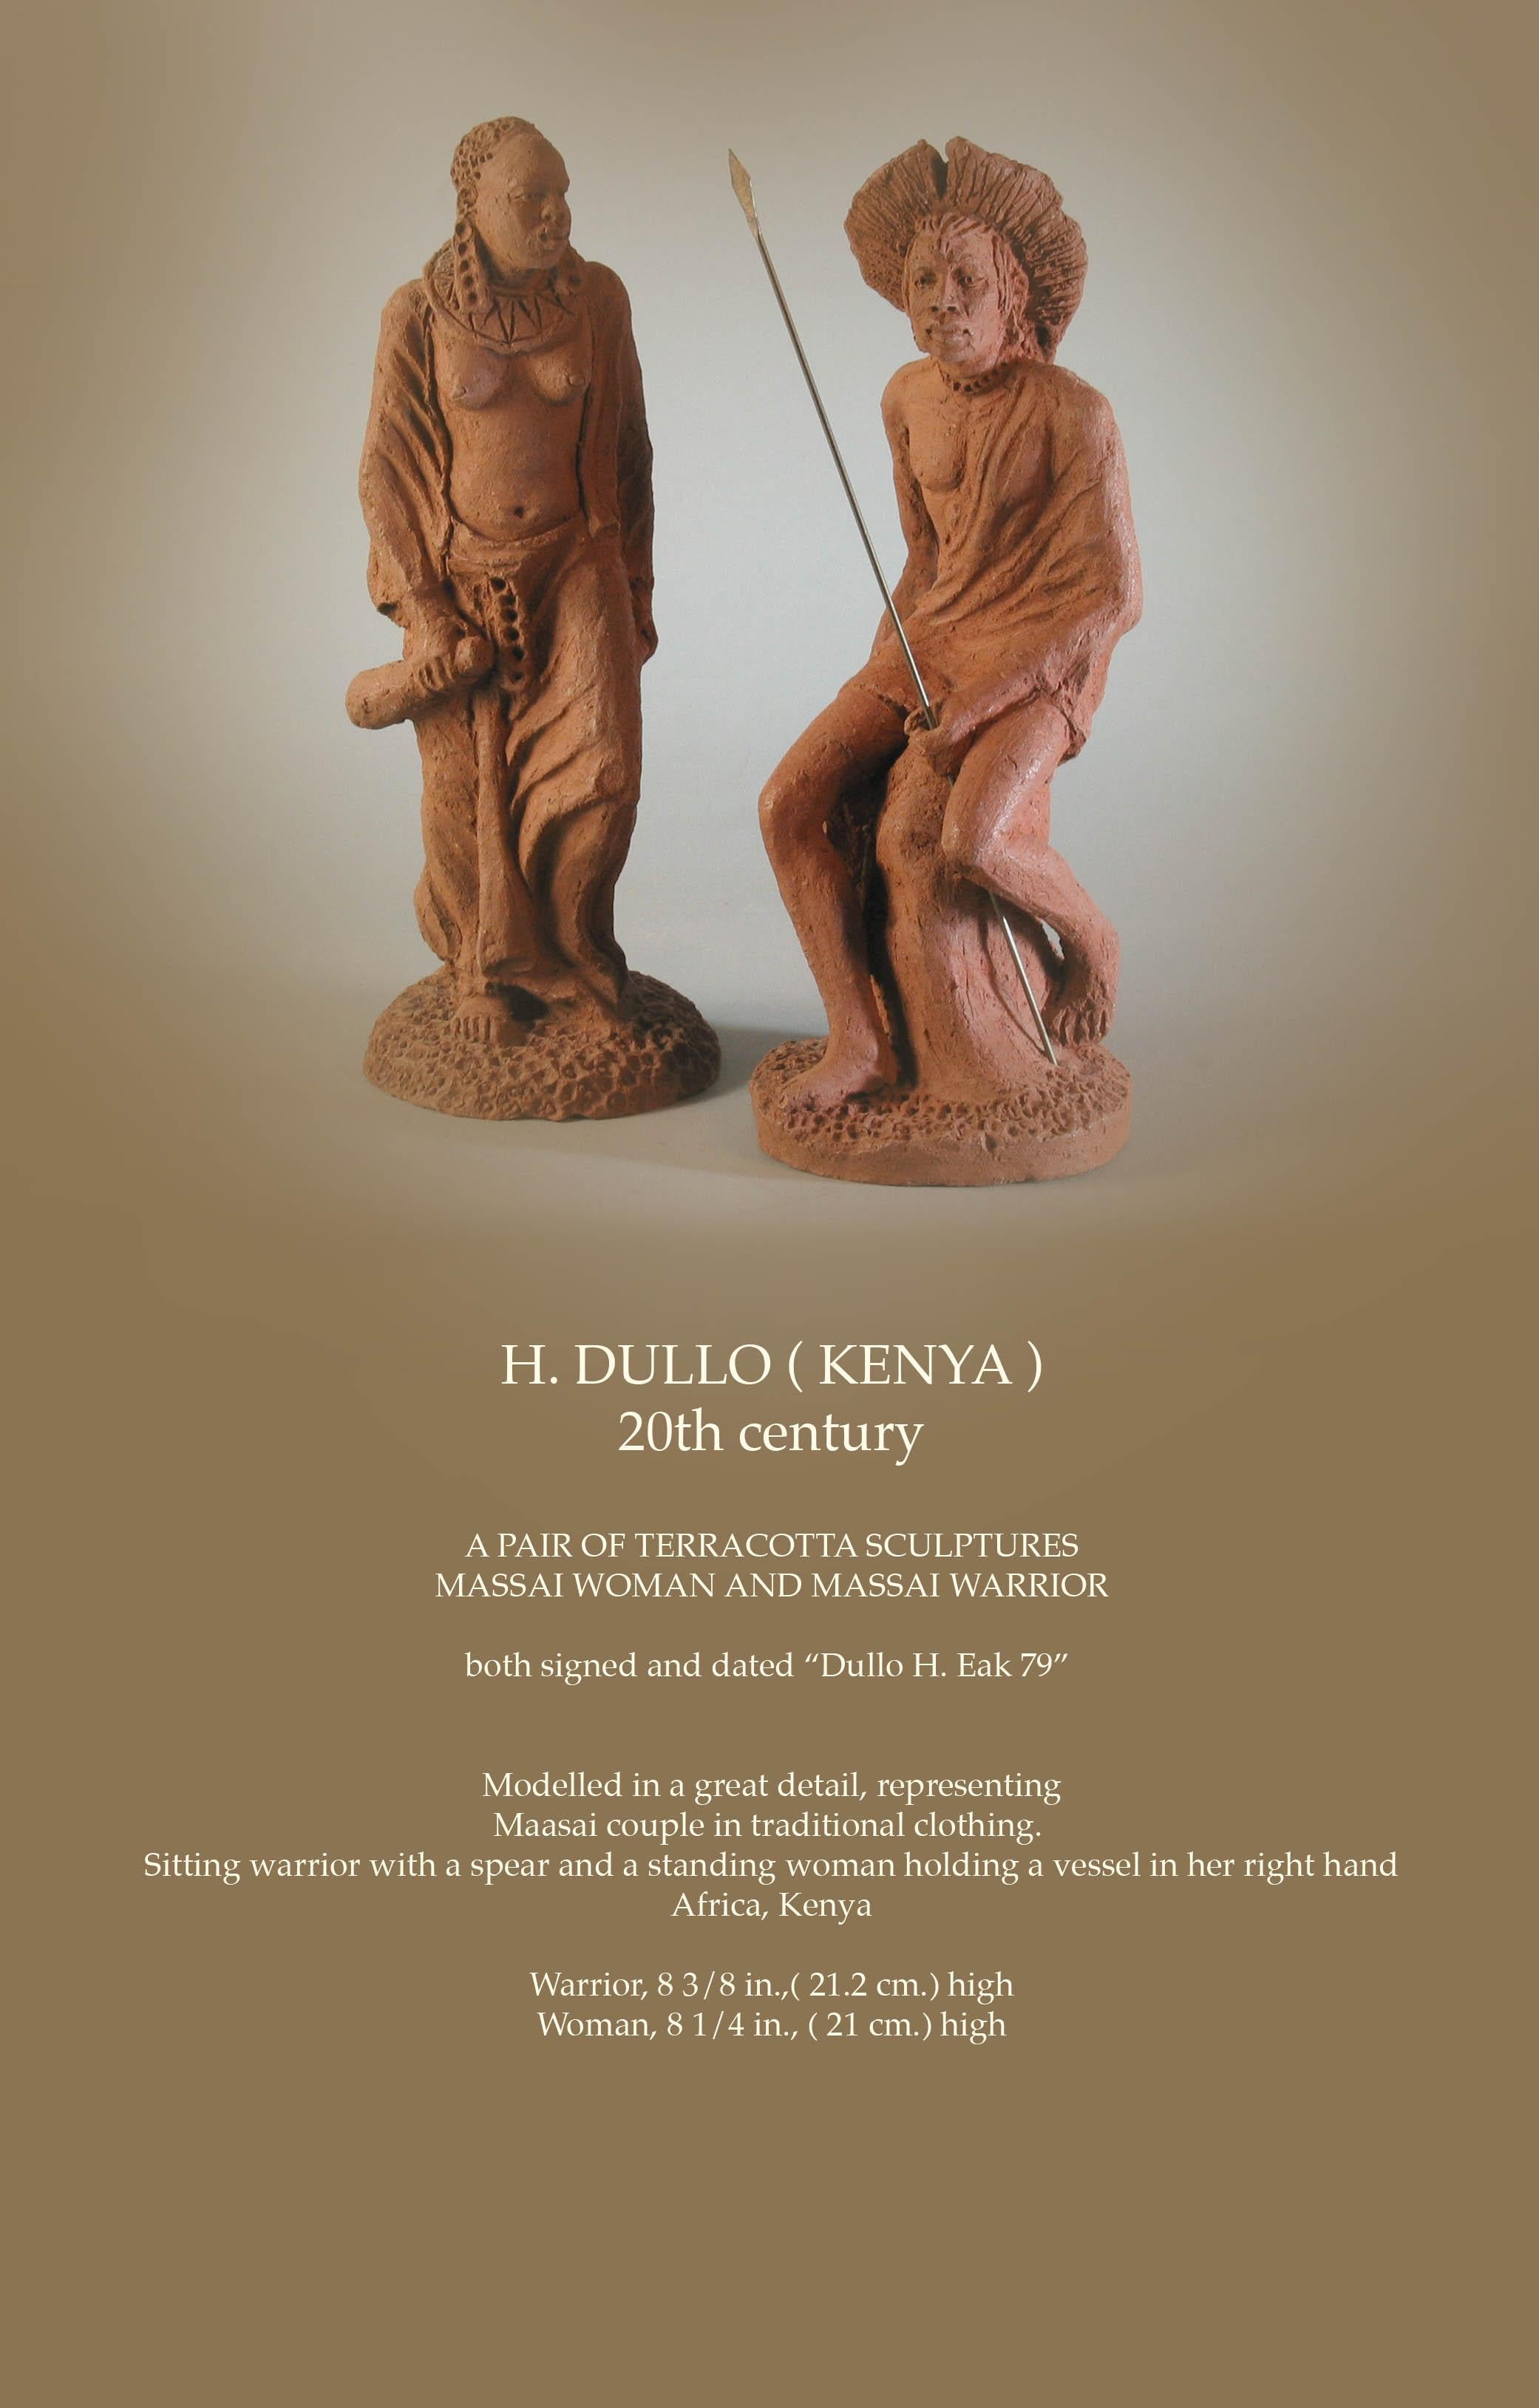 H. DULLO (KENYA),
20th century.

A pair of terracotta sculptures
Massai Woman and Massai Warrior.

Both signed and dated “Dullo H. Eak 79” 


Modelled in a great detail, representing
Maasai couple in traditional clothing. 
Sitting warrior with a